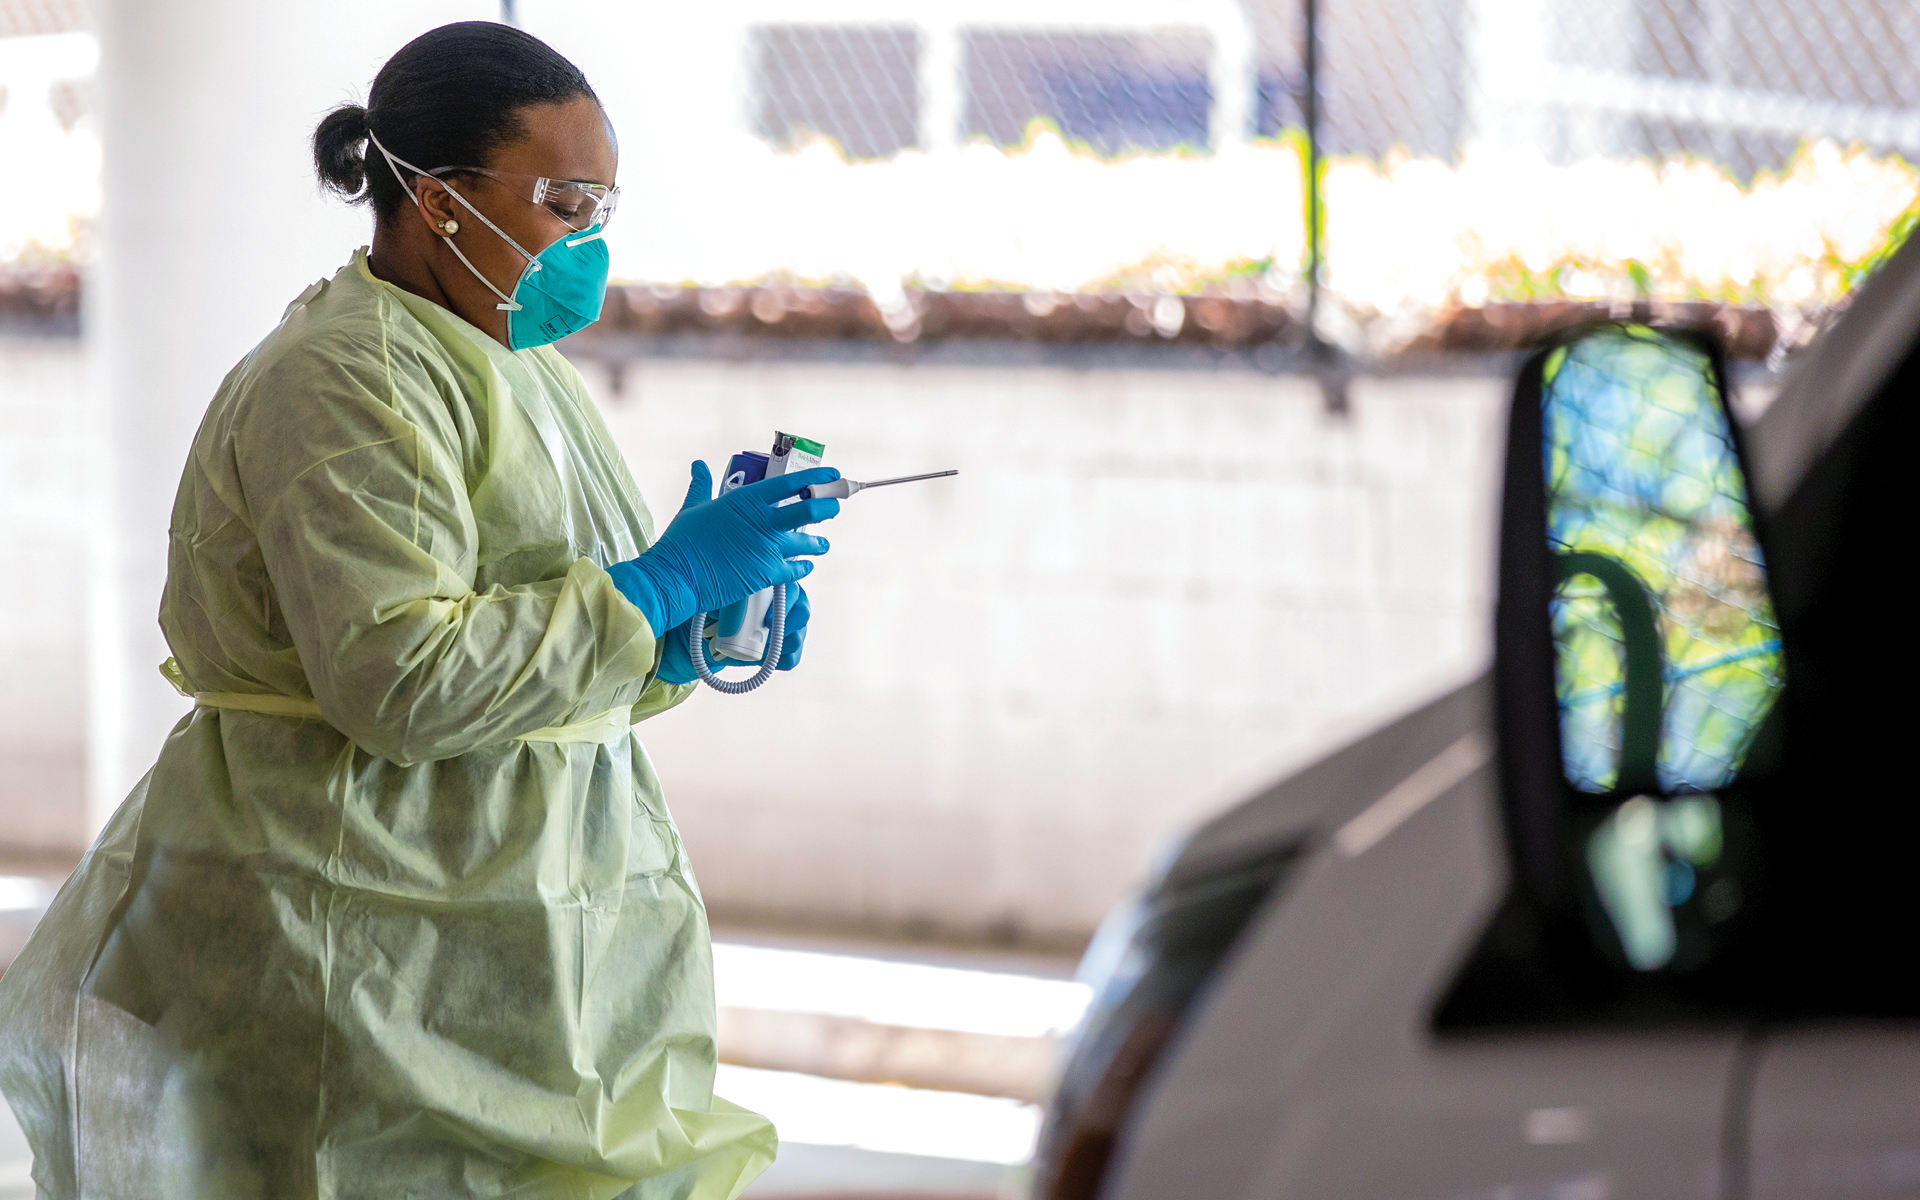 Adrienne Davis holds a thermometer before taking a patient's temperature at the COVID-19 drive-thru. She is wearing PPE including a face mask, goggles, gloves and a medical gown. The patient's car is in the right of the frame of the photo.